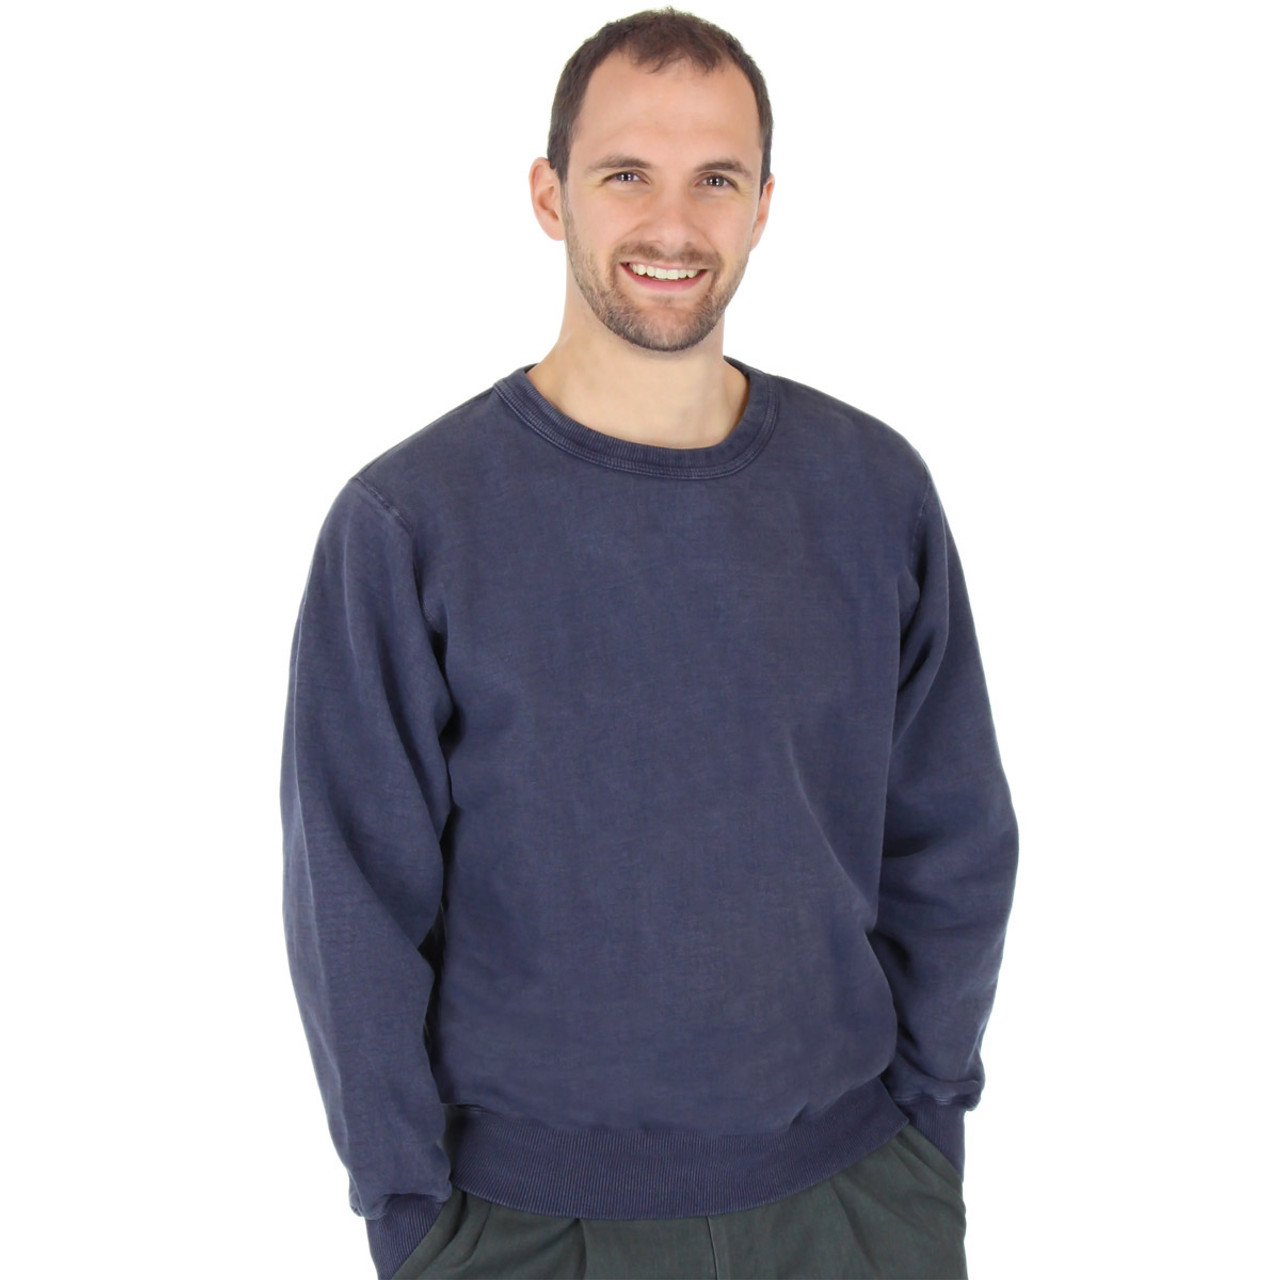 Mens Pullover Shirt Size Chart - Alignmed